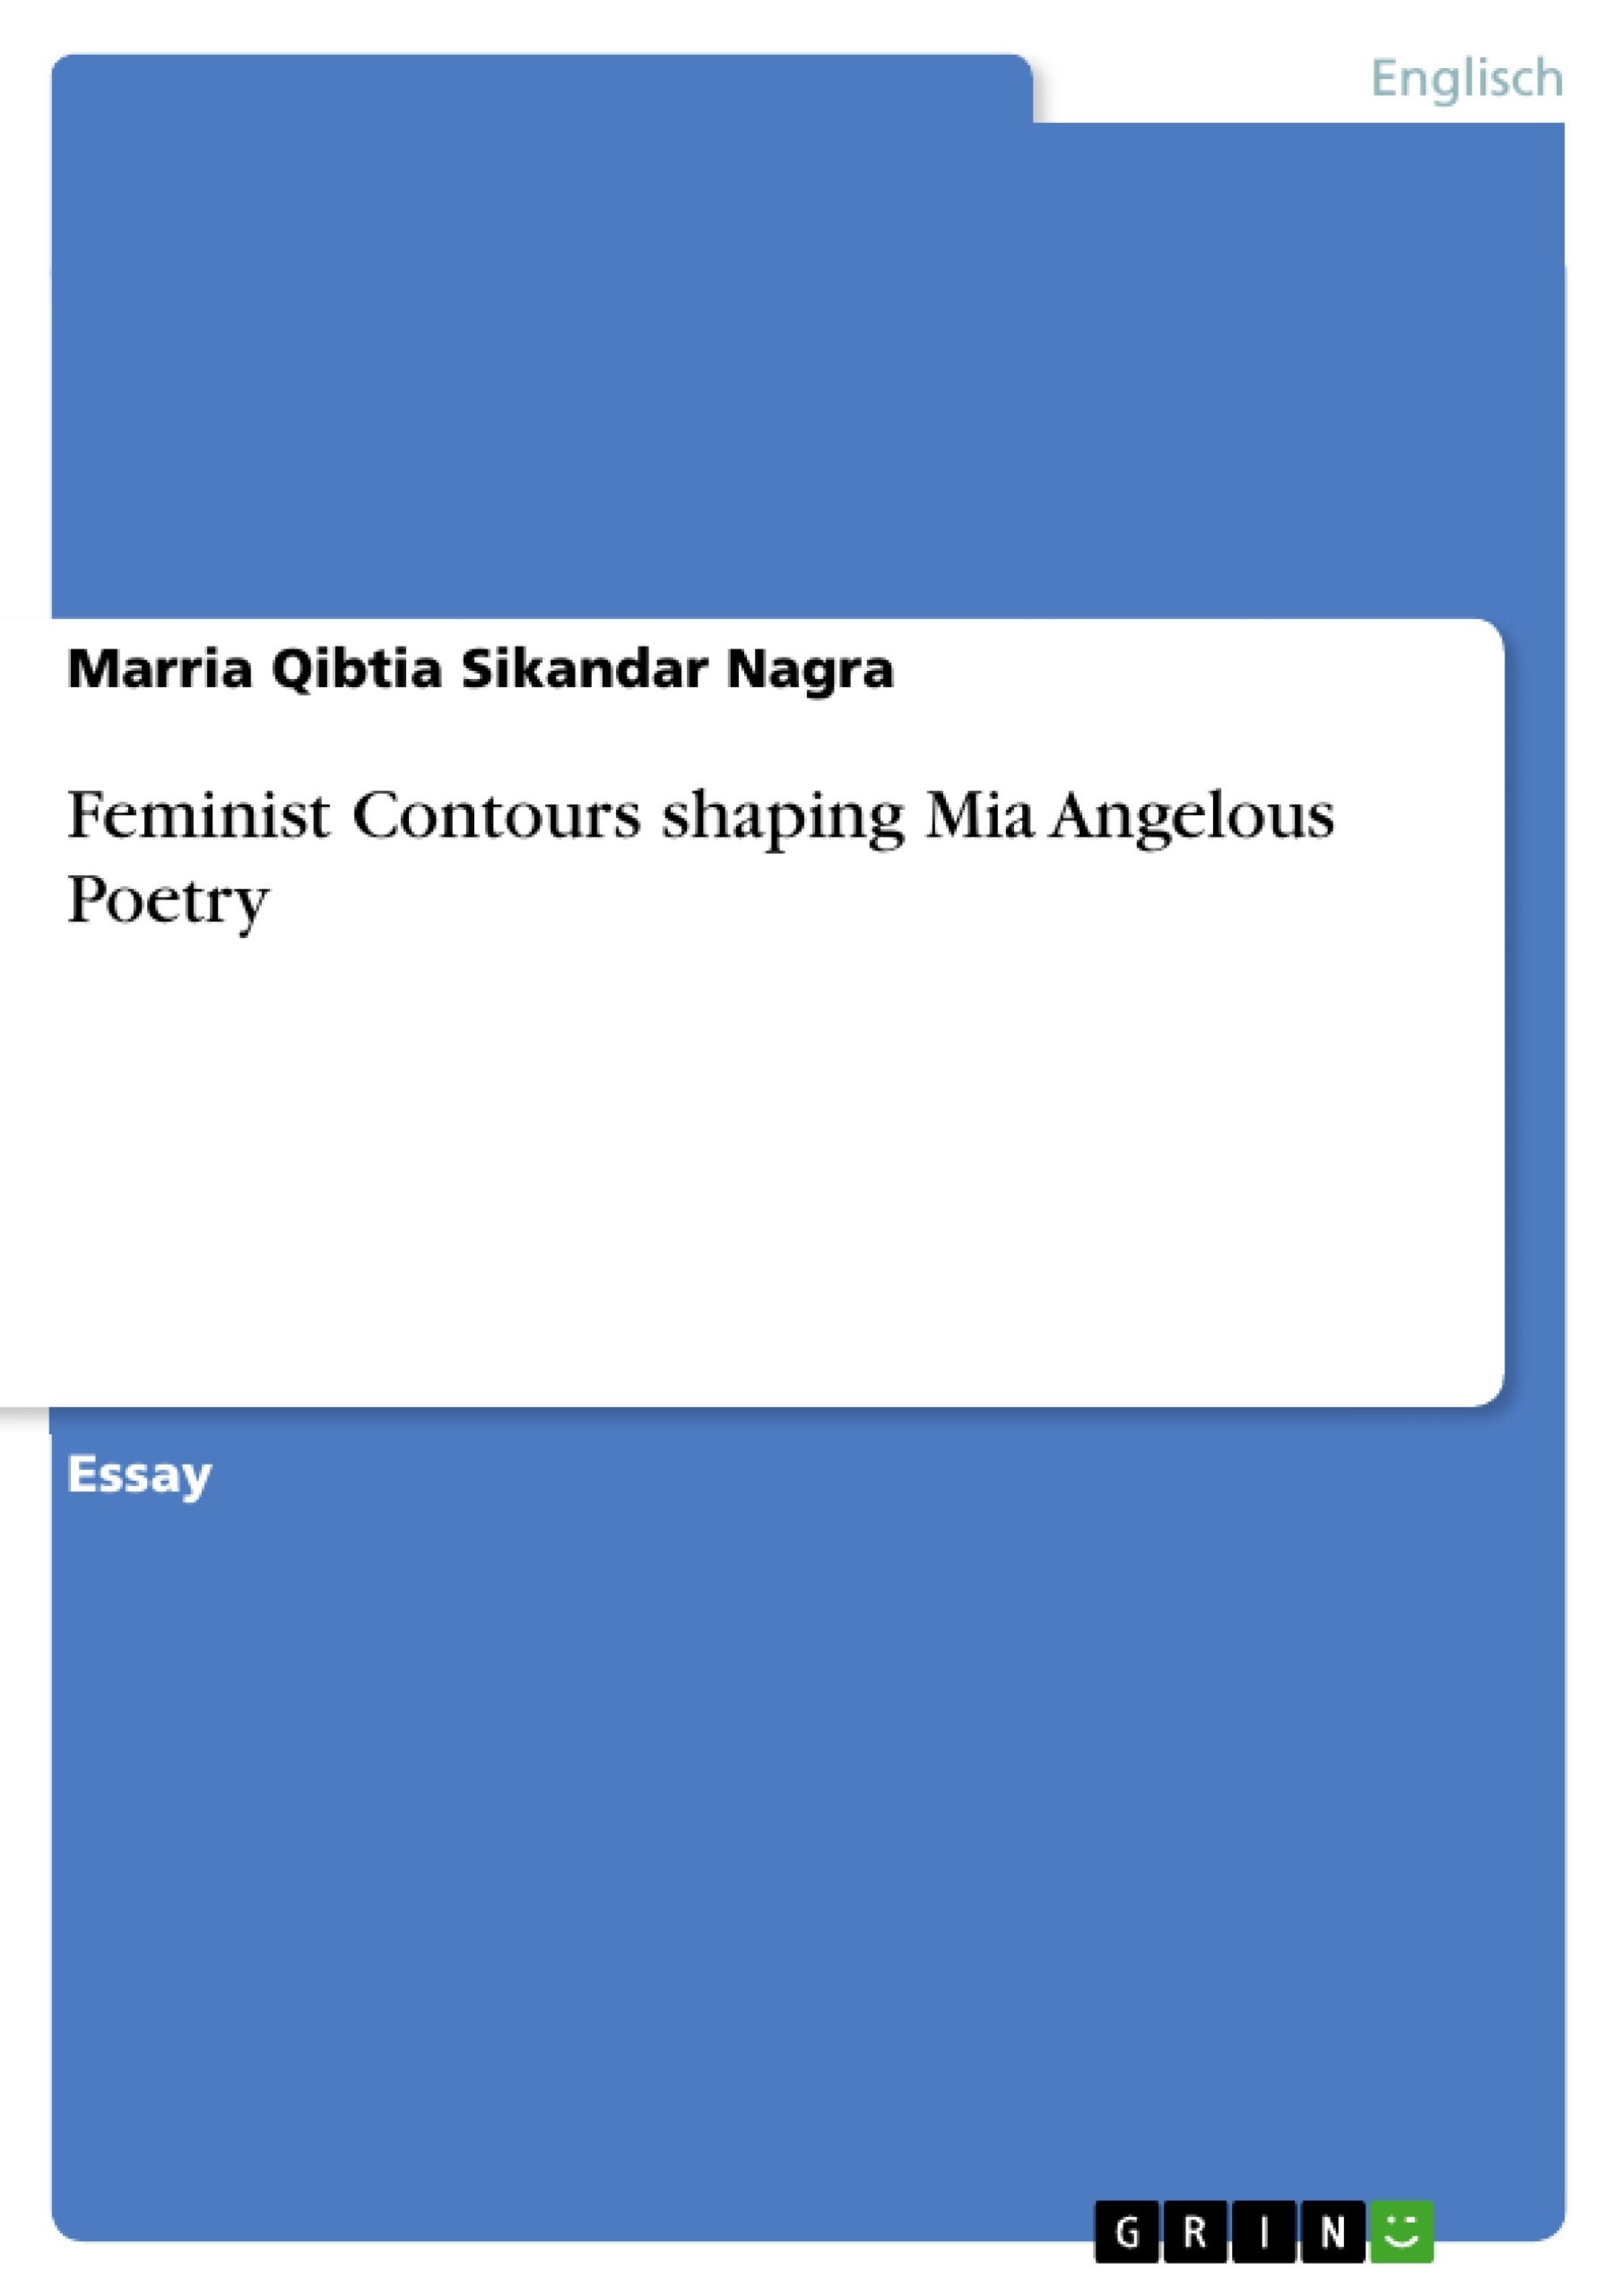 Titre: Feminist Contours shaping Mia Angelous Poetry